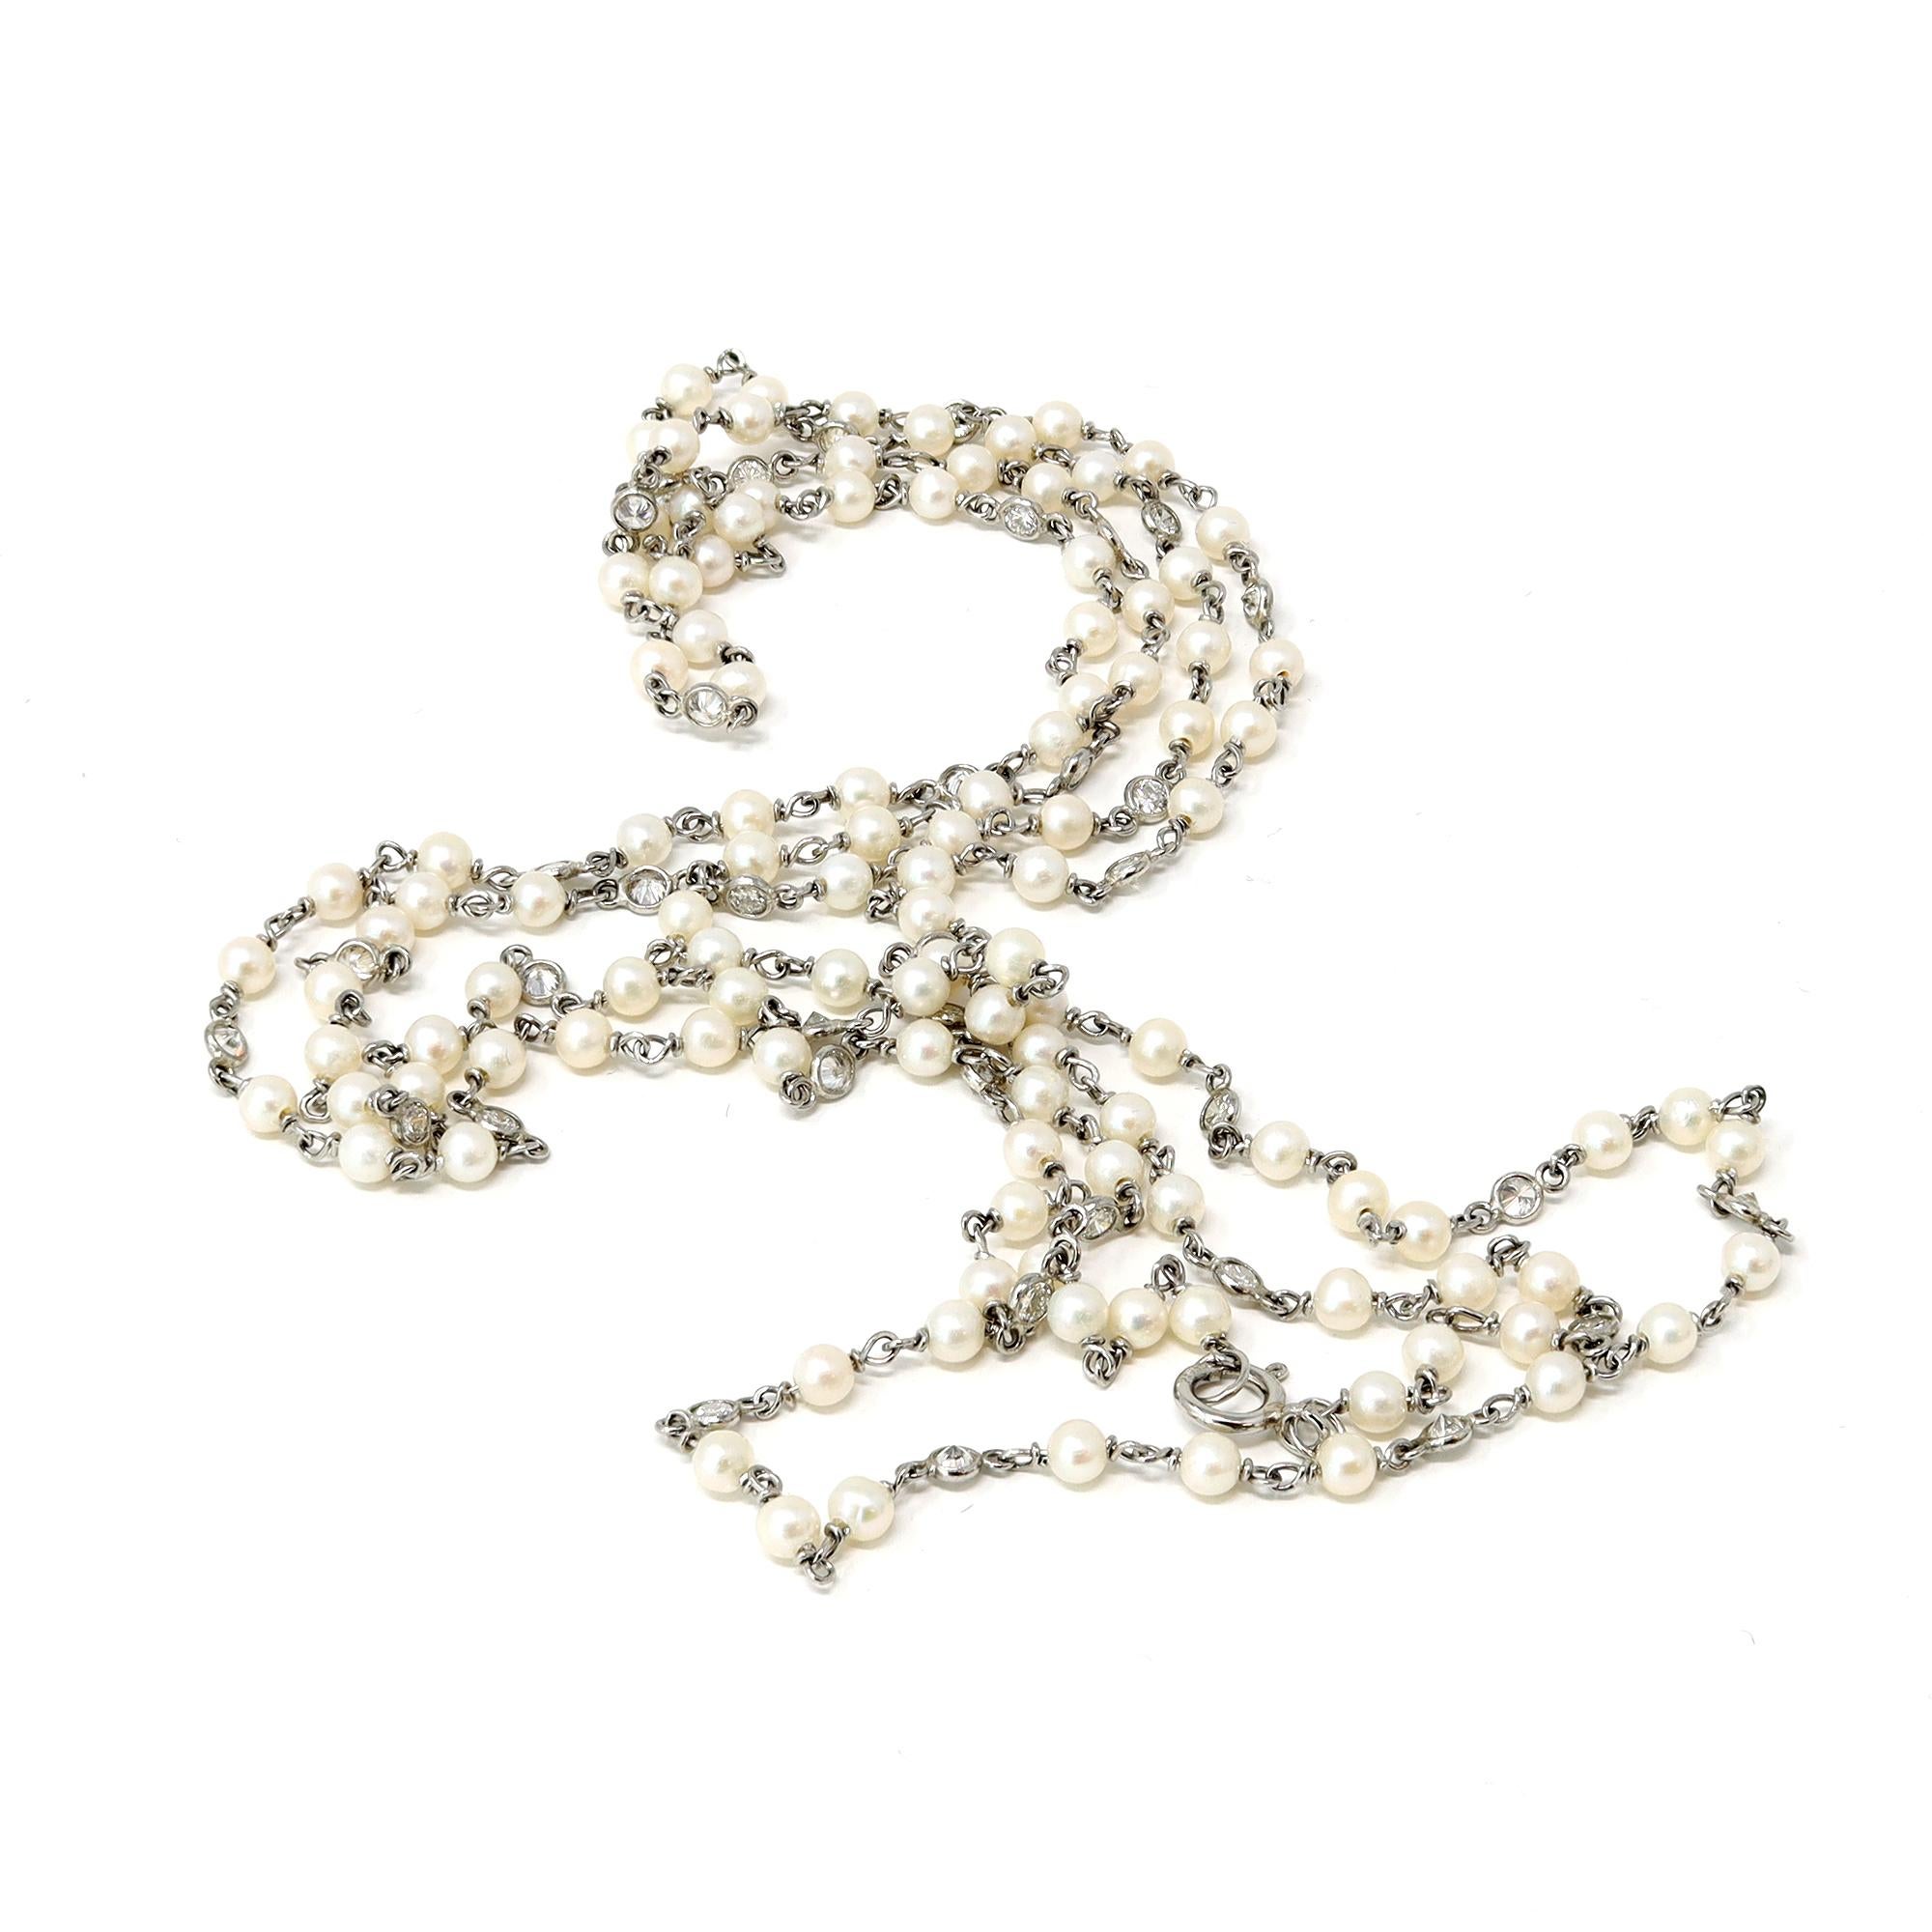 Contemporary Rosaria Varra Seed Pearl and Diamond Opera Necklace in Platinum